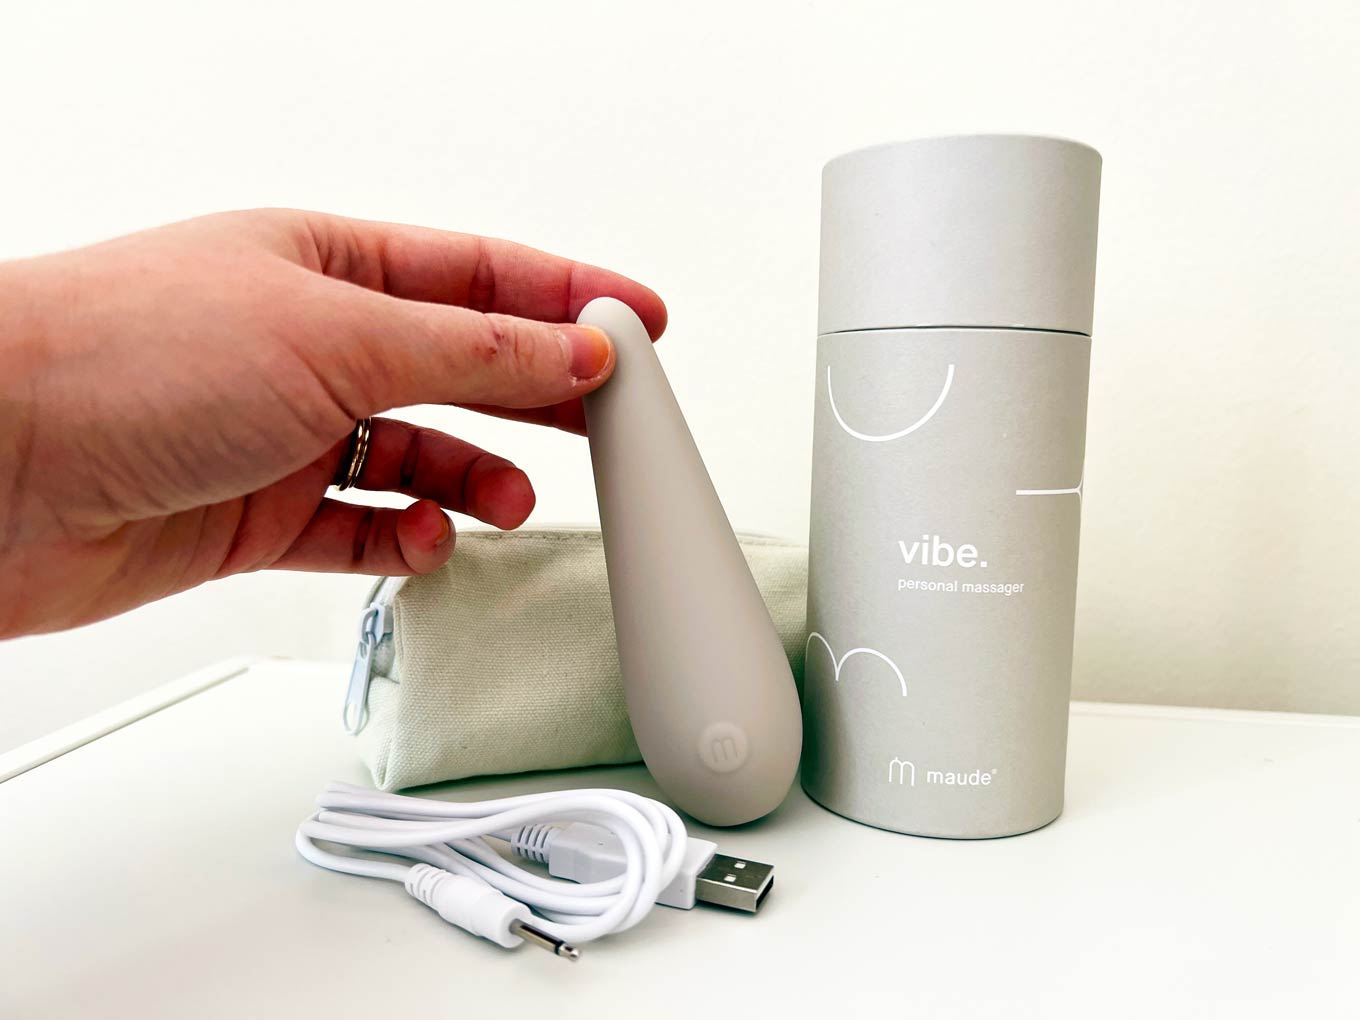 A hand holds up the Vibe from Maude, next to its packaging and carrying case